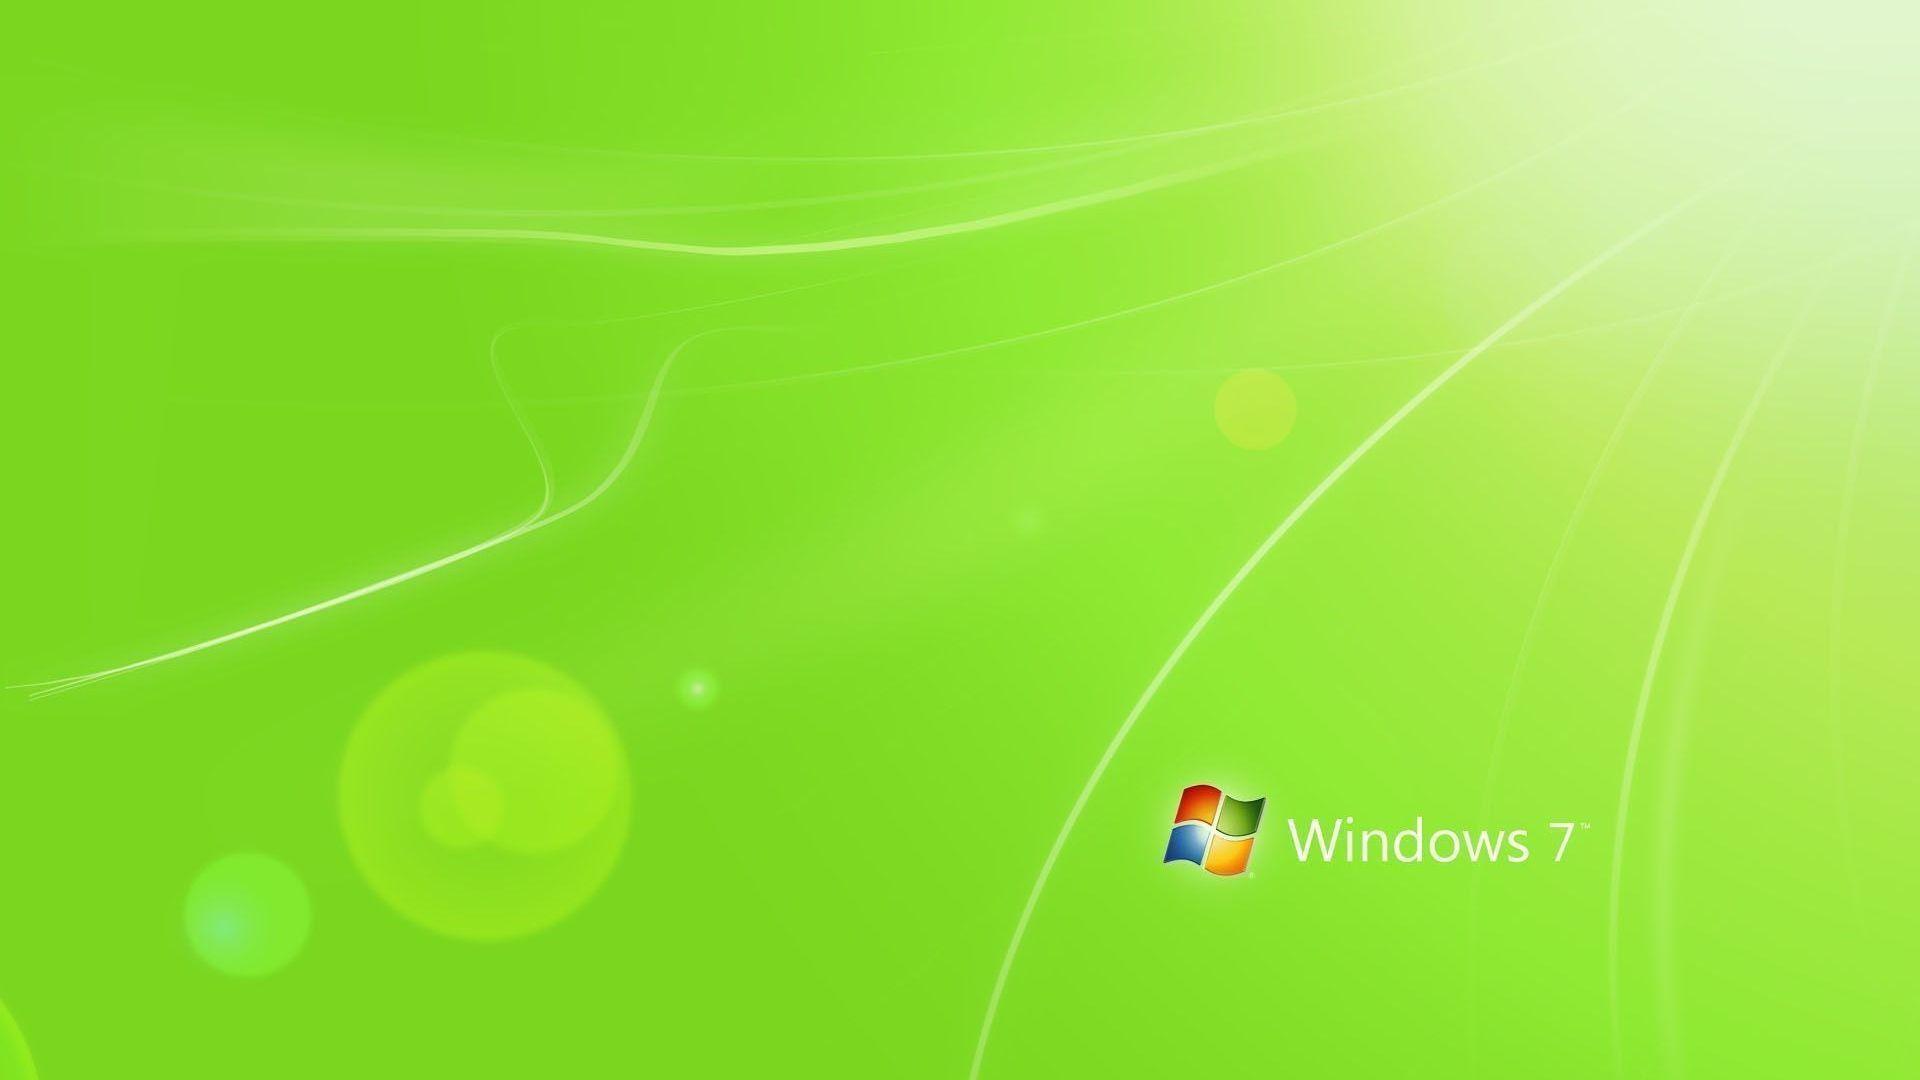 Wallpapers For > Windows 7 Ultimate Backgrounds 1080p